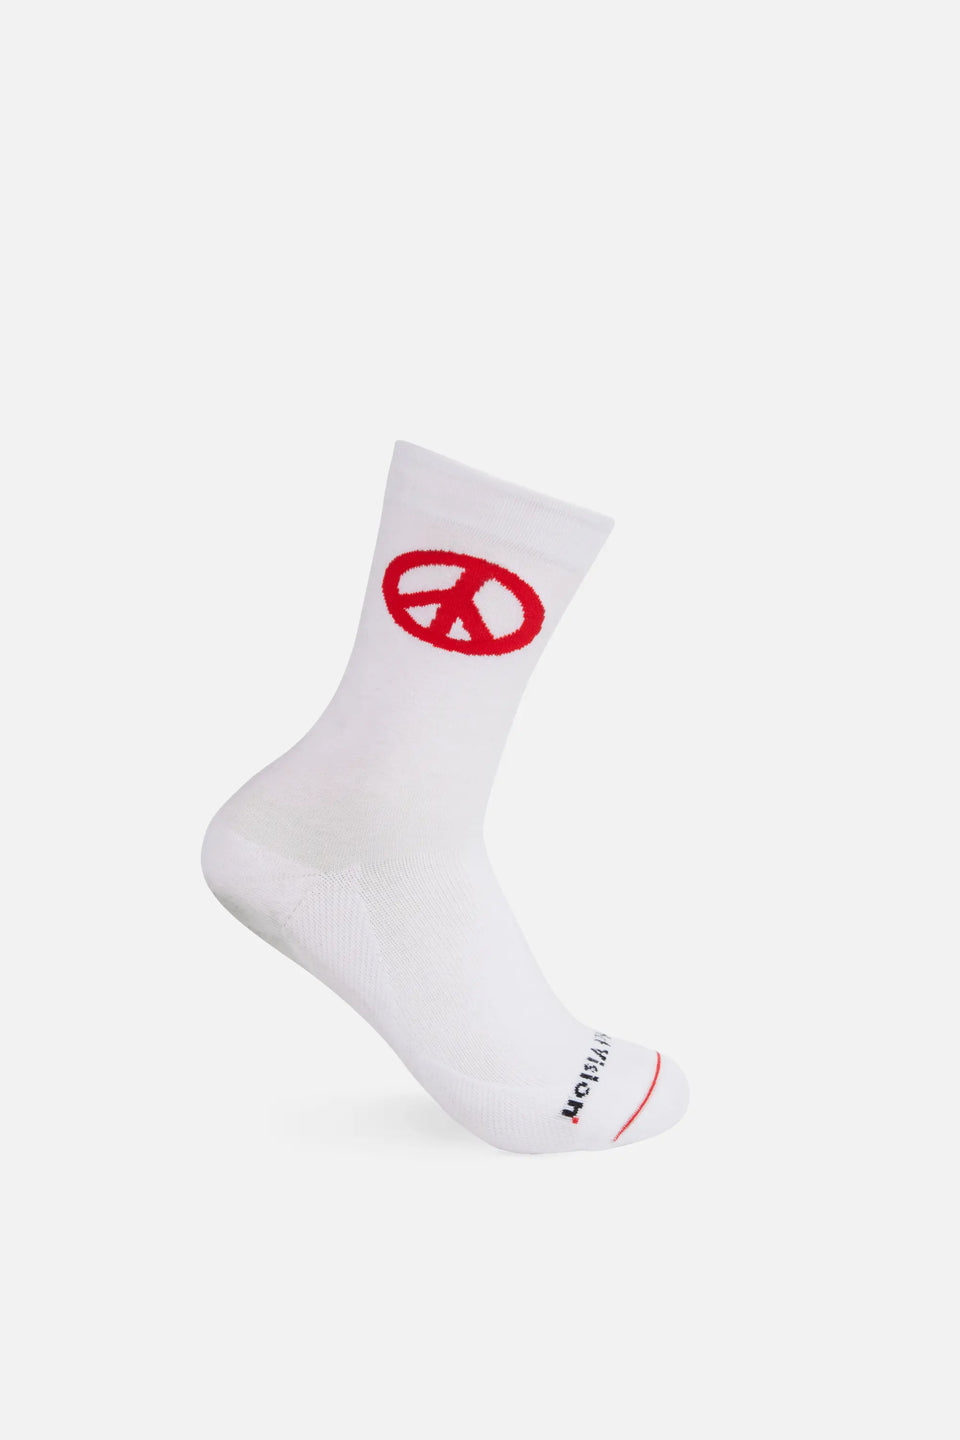 District Vision Los Angeles Running Yoshi Performance Socks White Calculus Victoria BC Canada